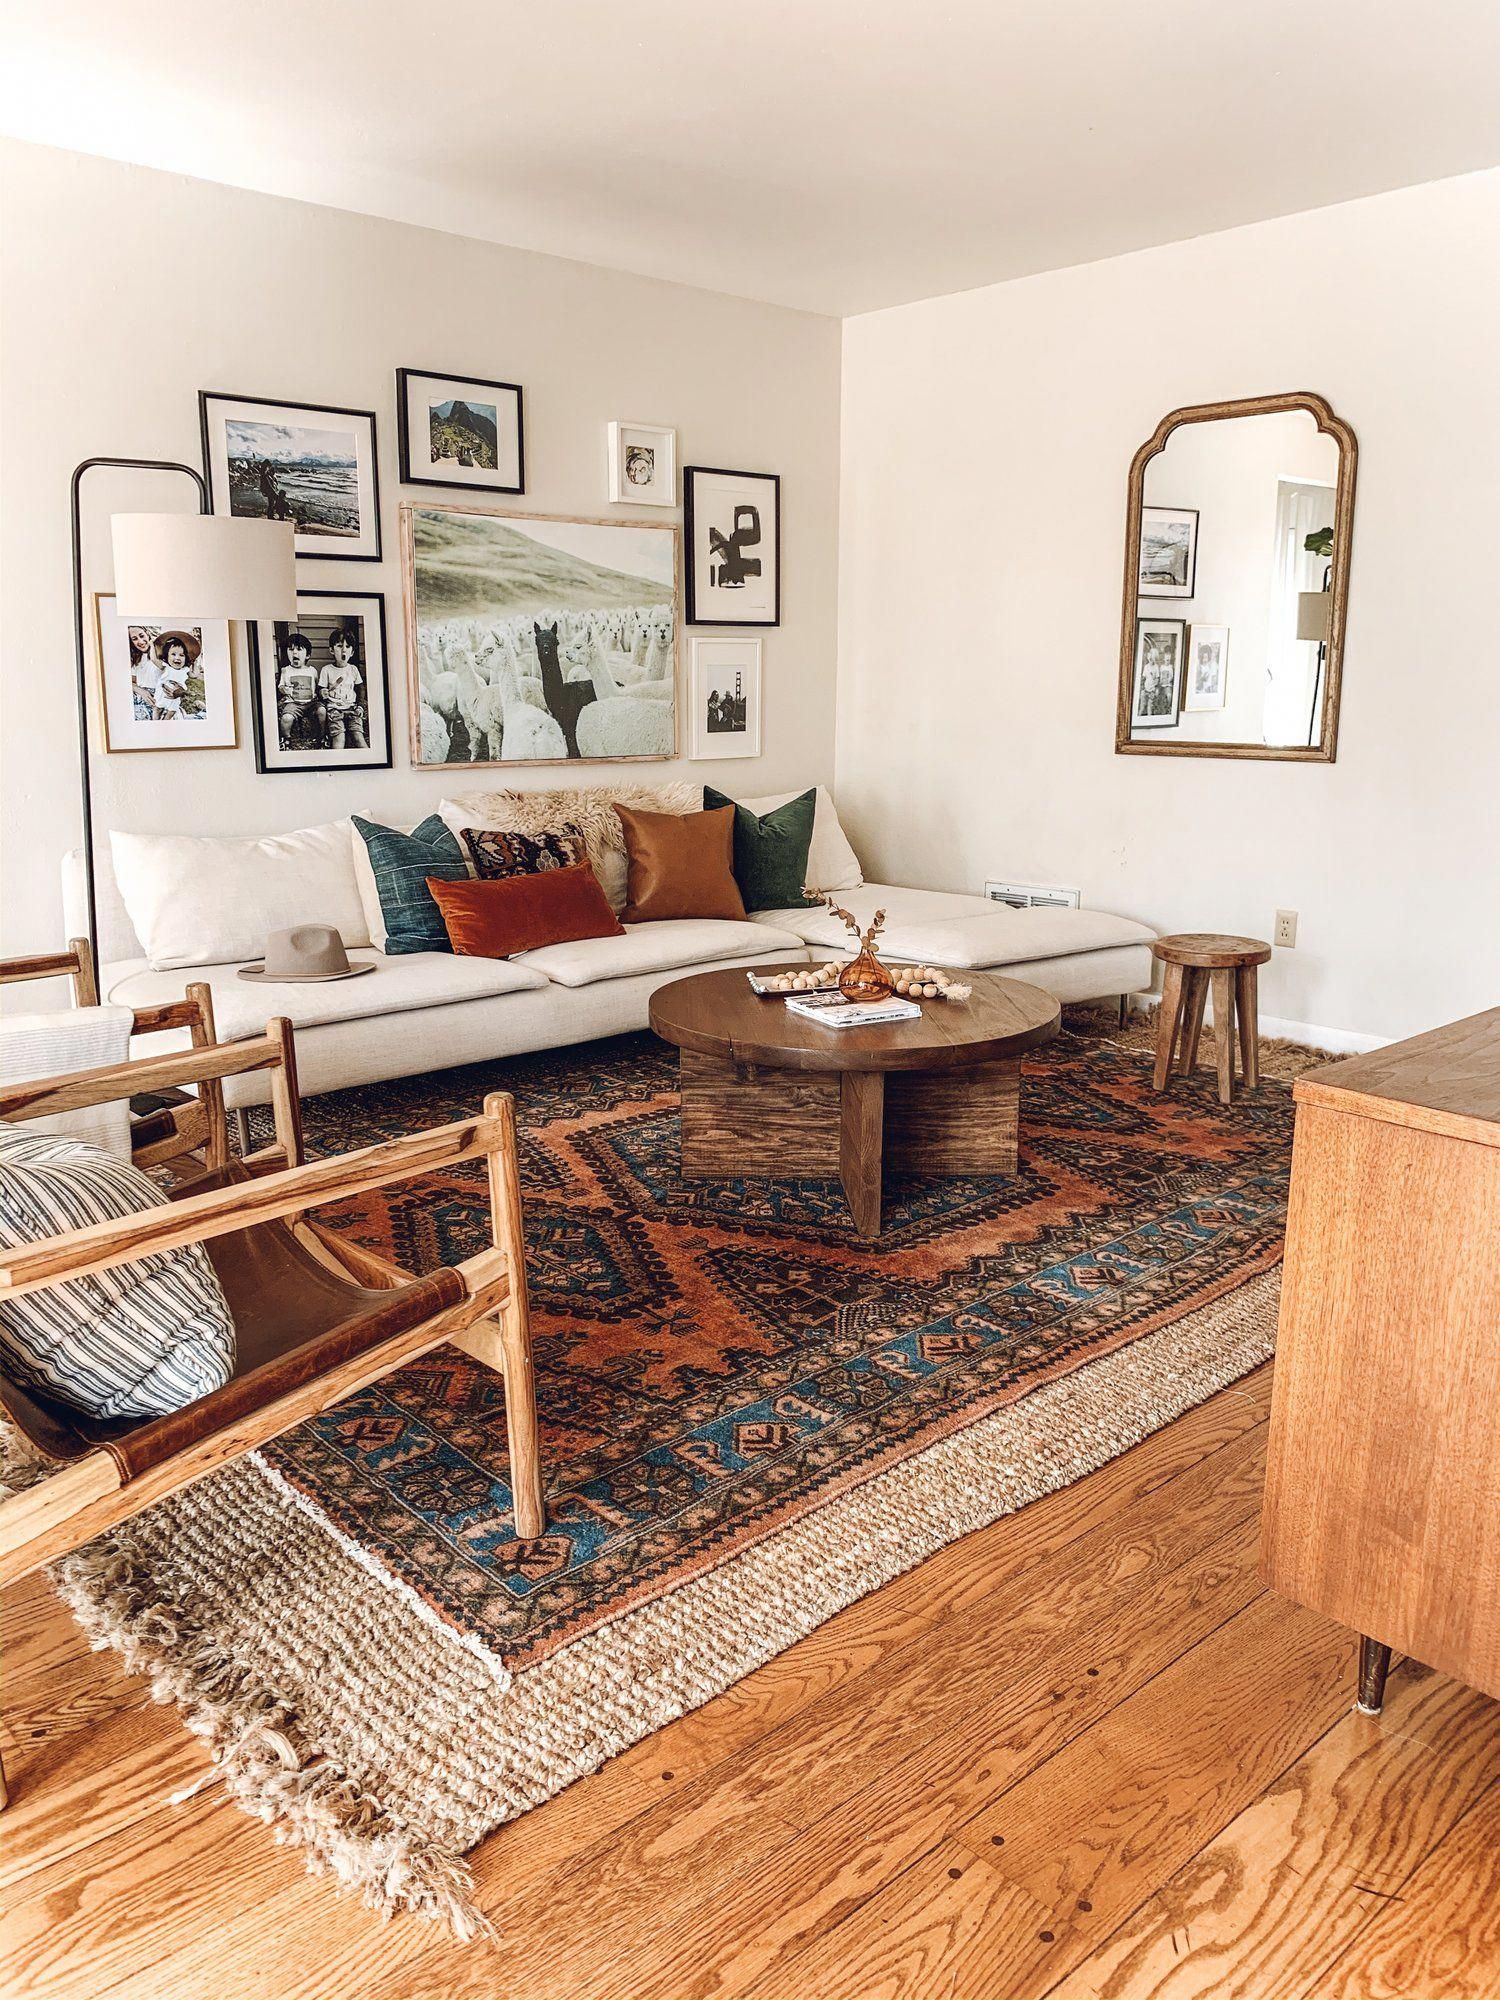 The Art Of Layering: Rugs Throws And Textiles In Home Decor